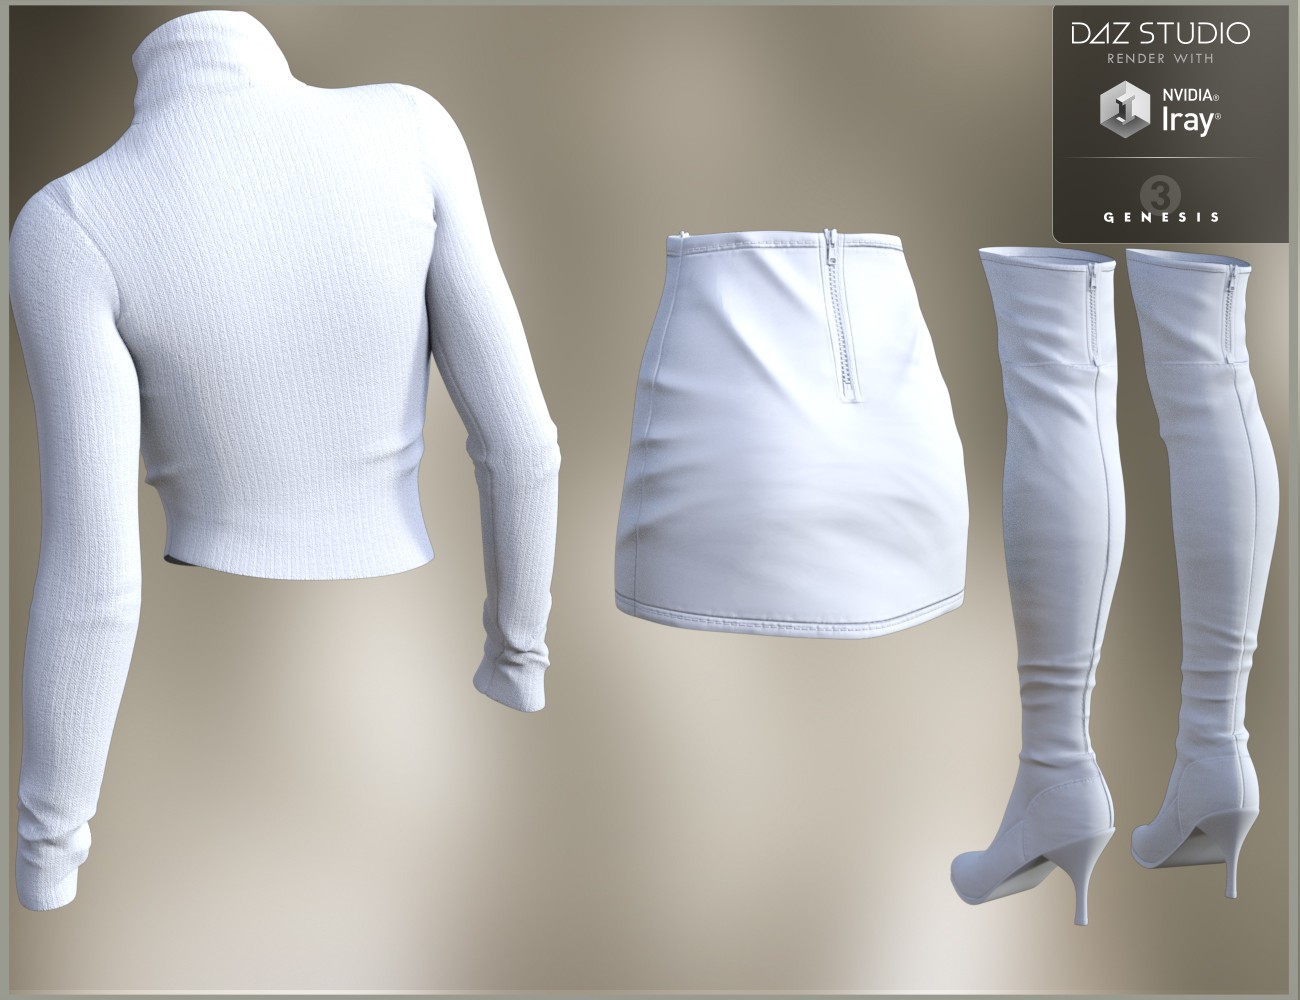 Download Daz Studio 3 For Free Daz 3d Leather Skirt Outfit For